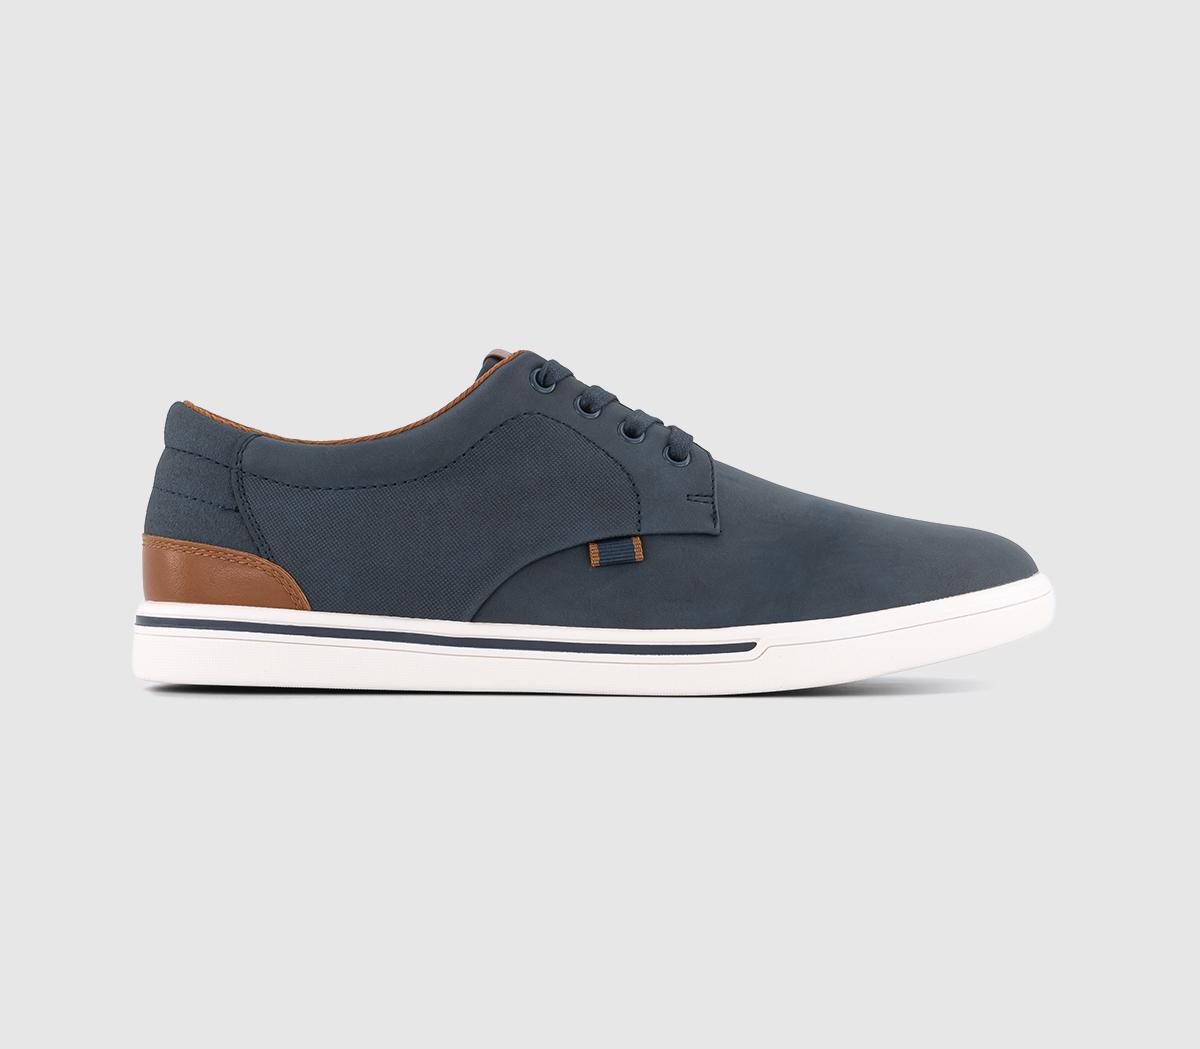 OFFICECasey Perforated Lace Up ShoesNavy